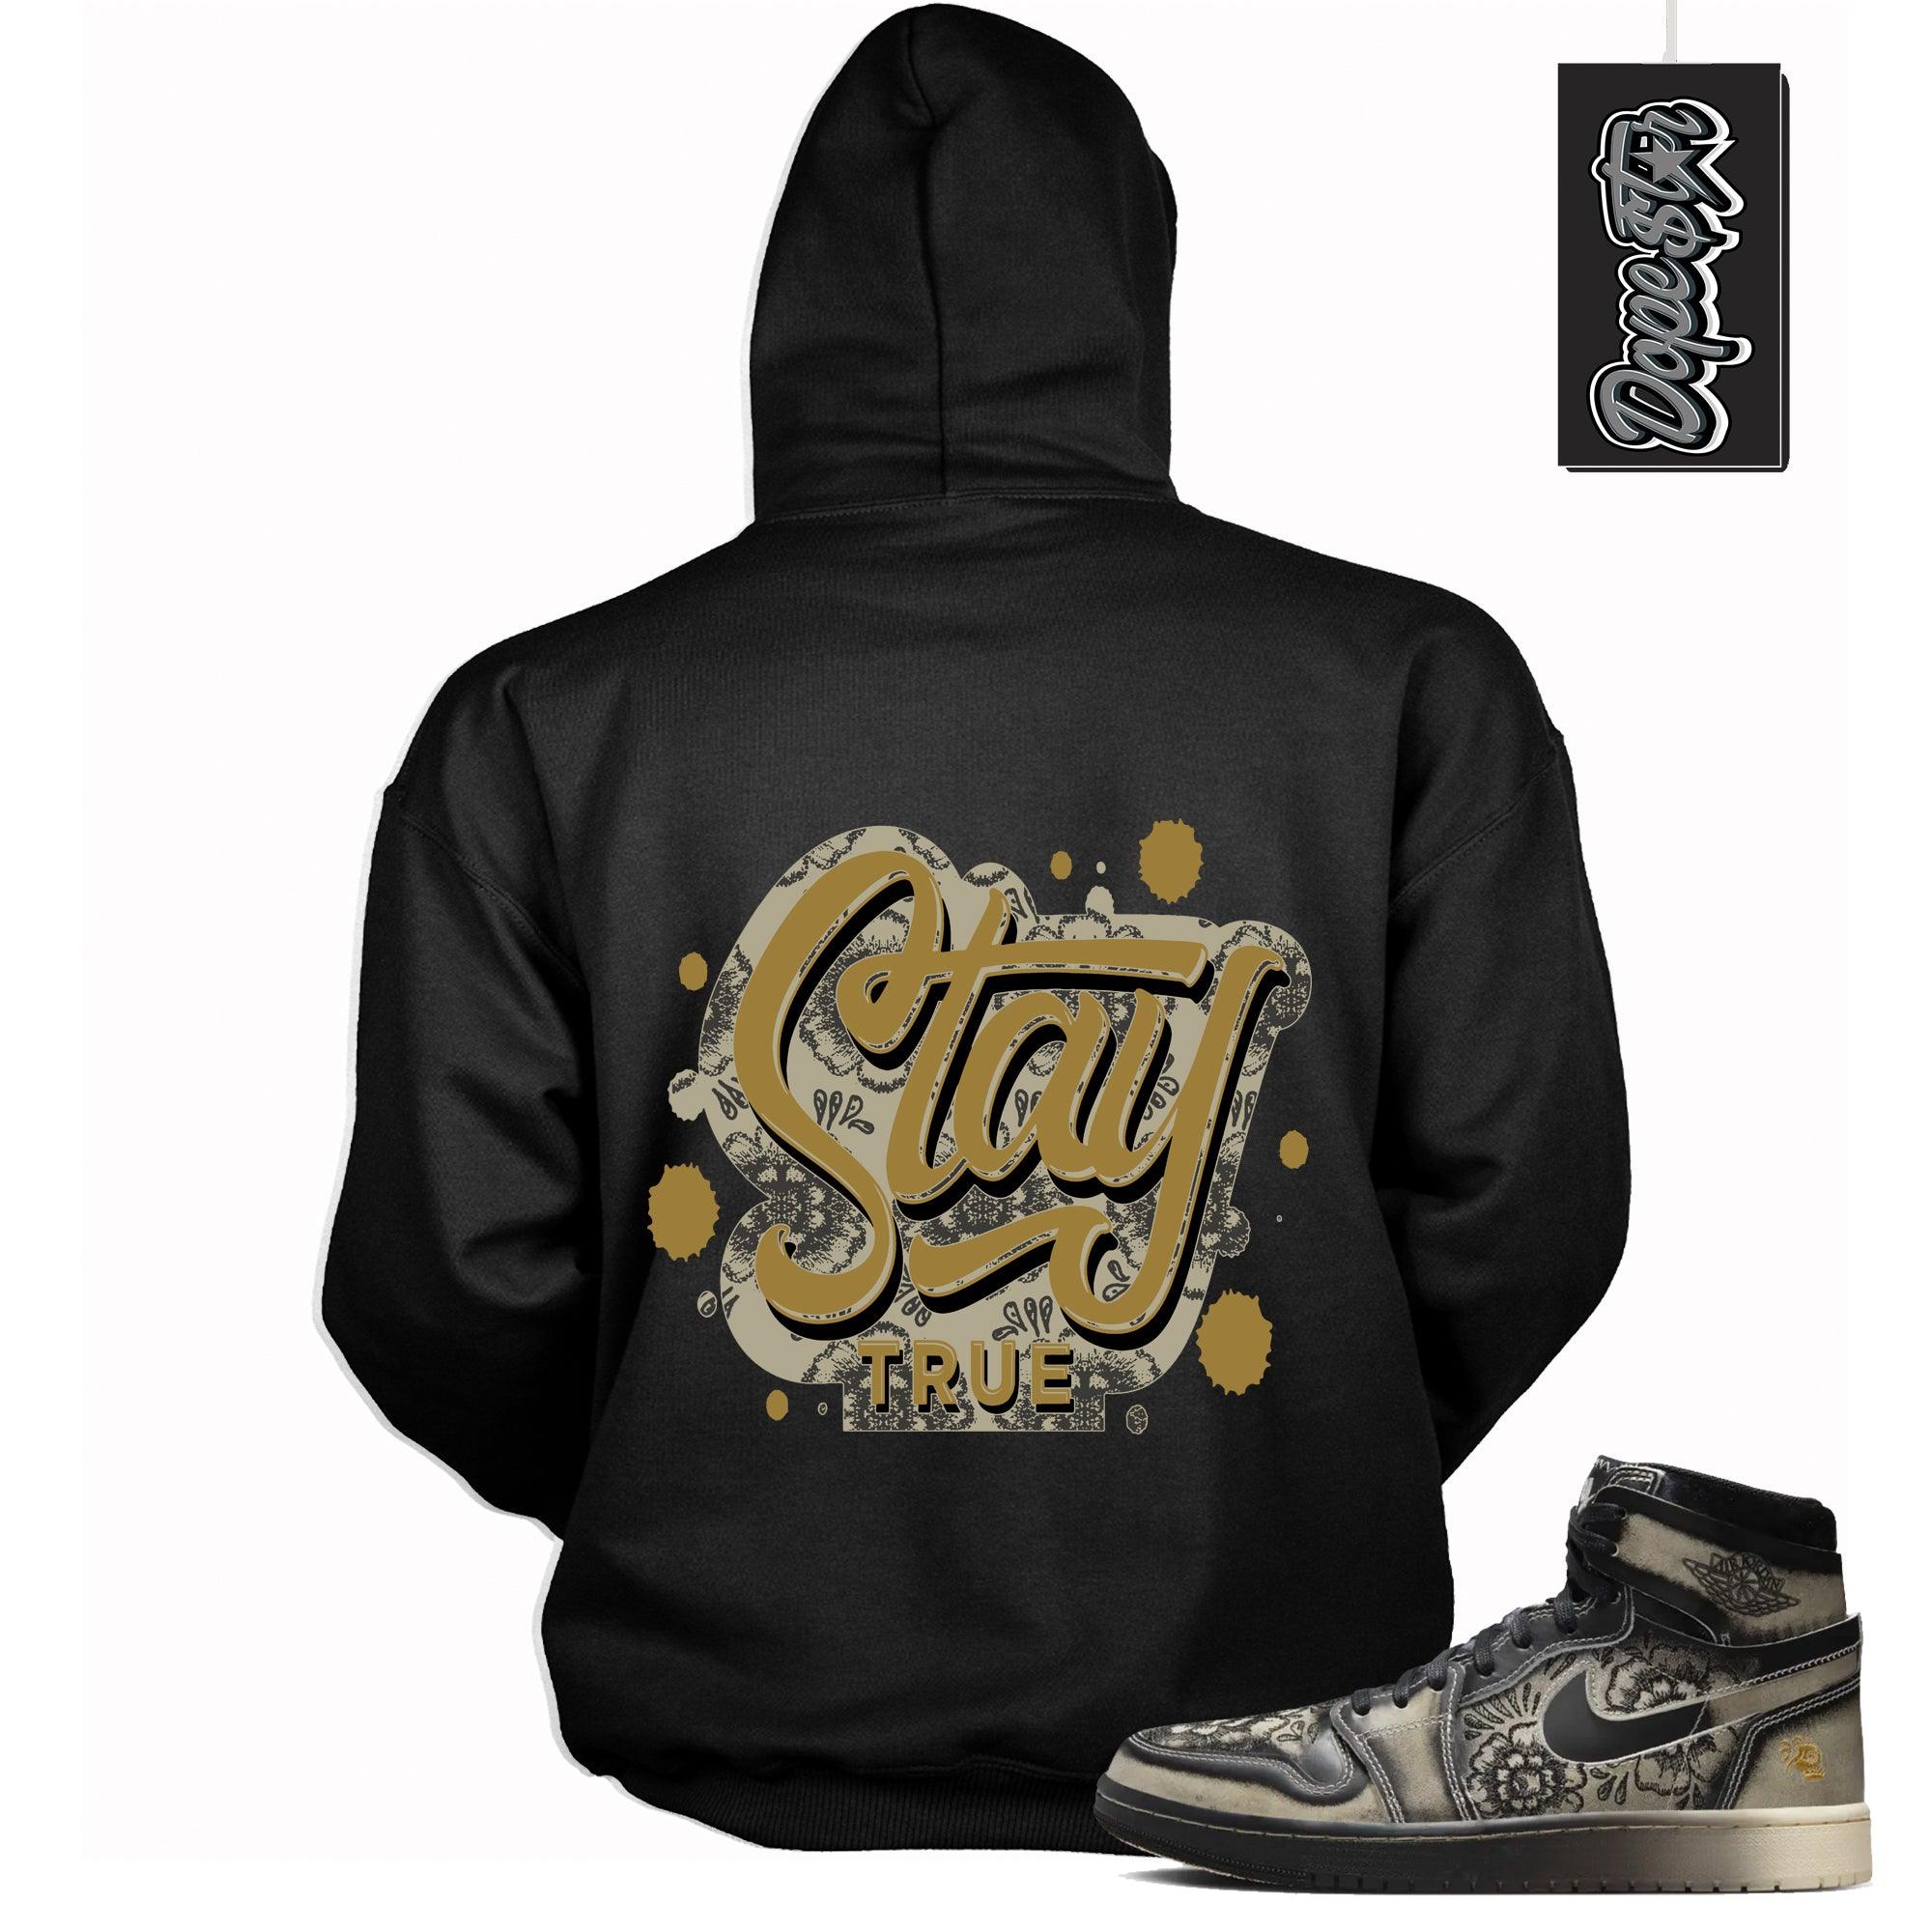 Cool Black Graphic Hoodie with “ Stay True “ print, that perfectly matches Air Jordan 1 High Zoom Comfort 2 Dia de Muertos Black and Pale Ivory sneakers